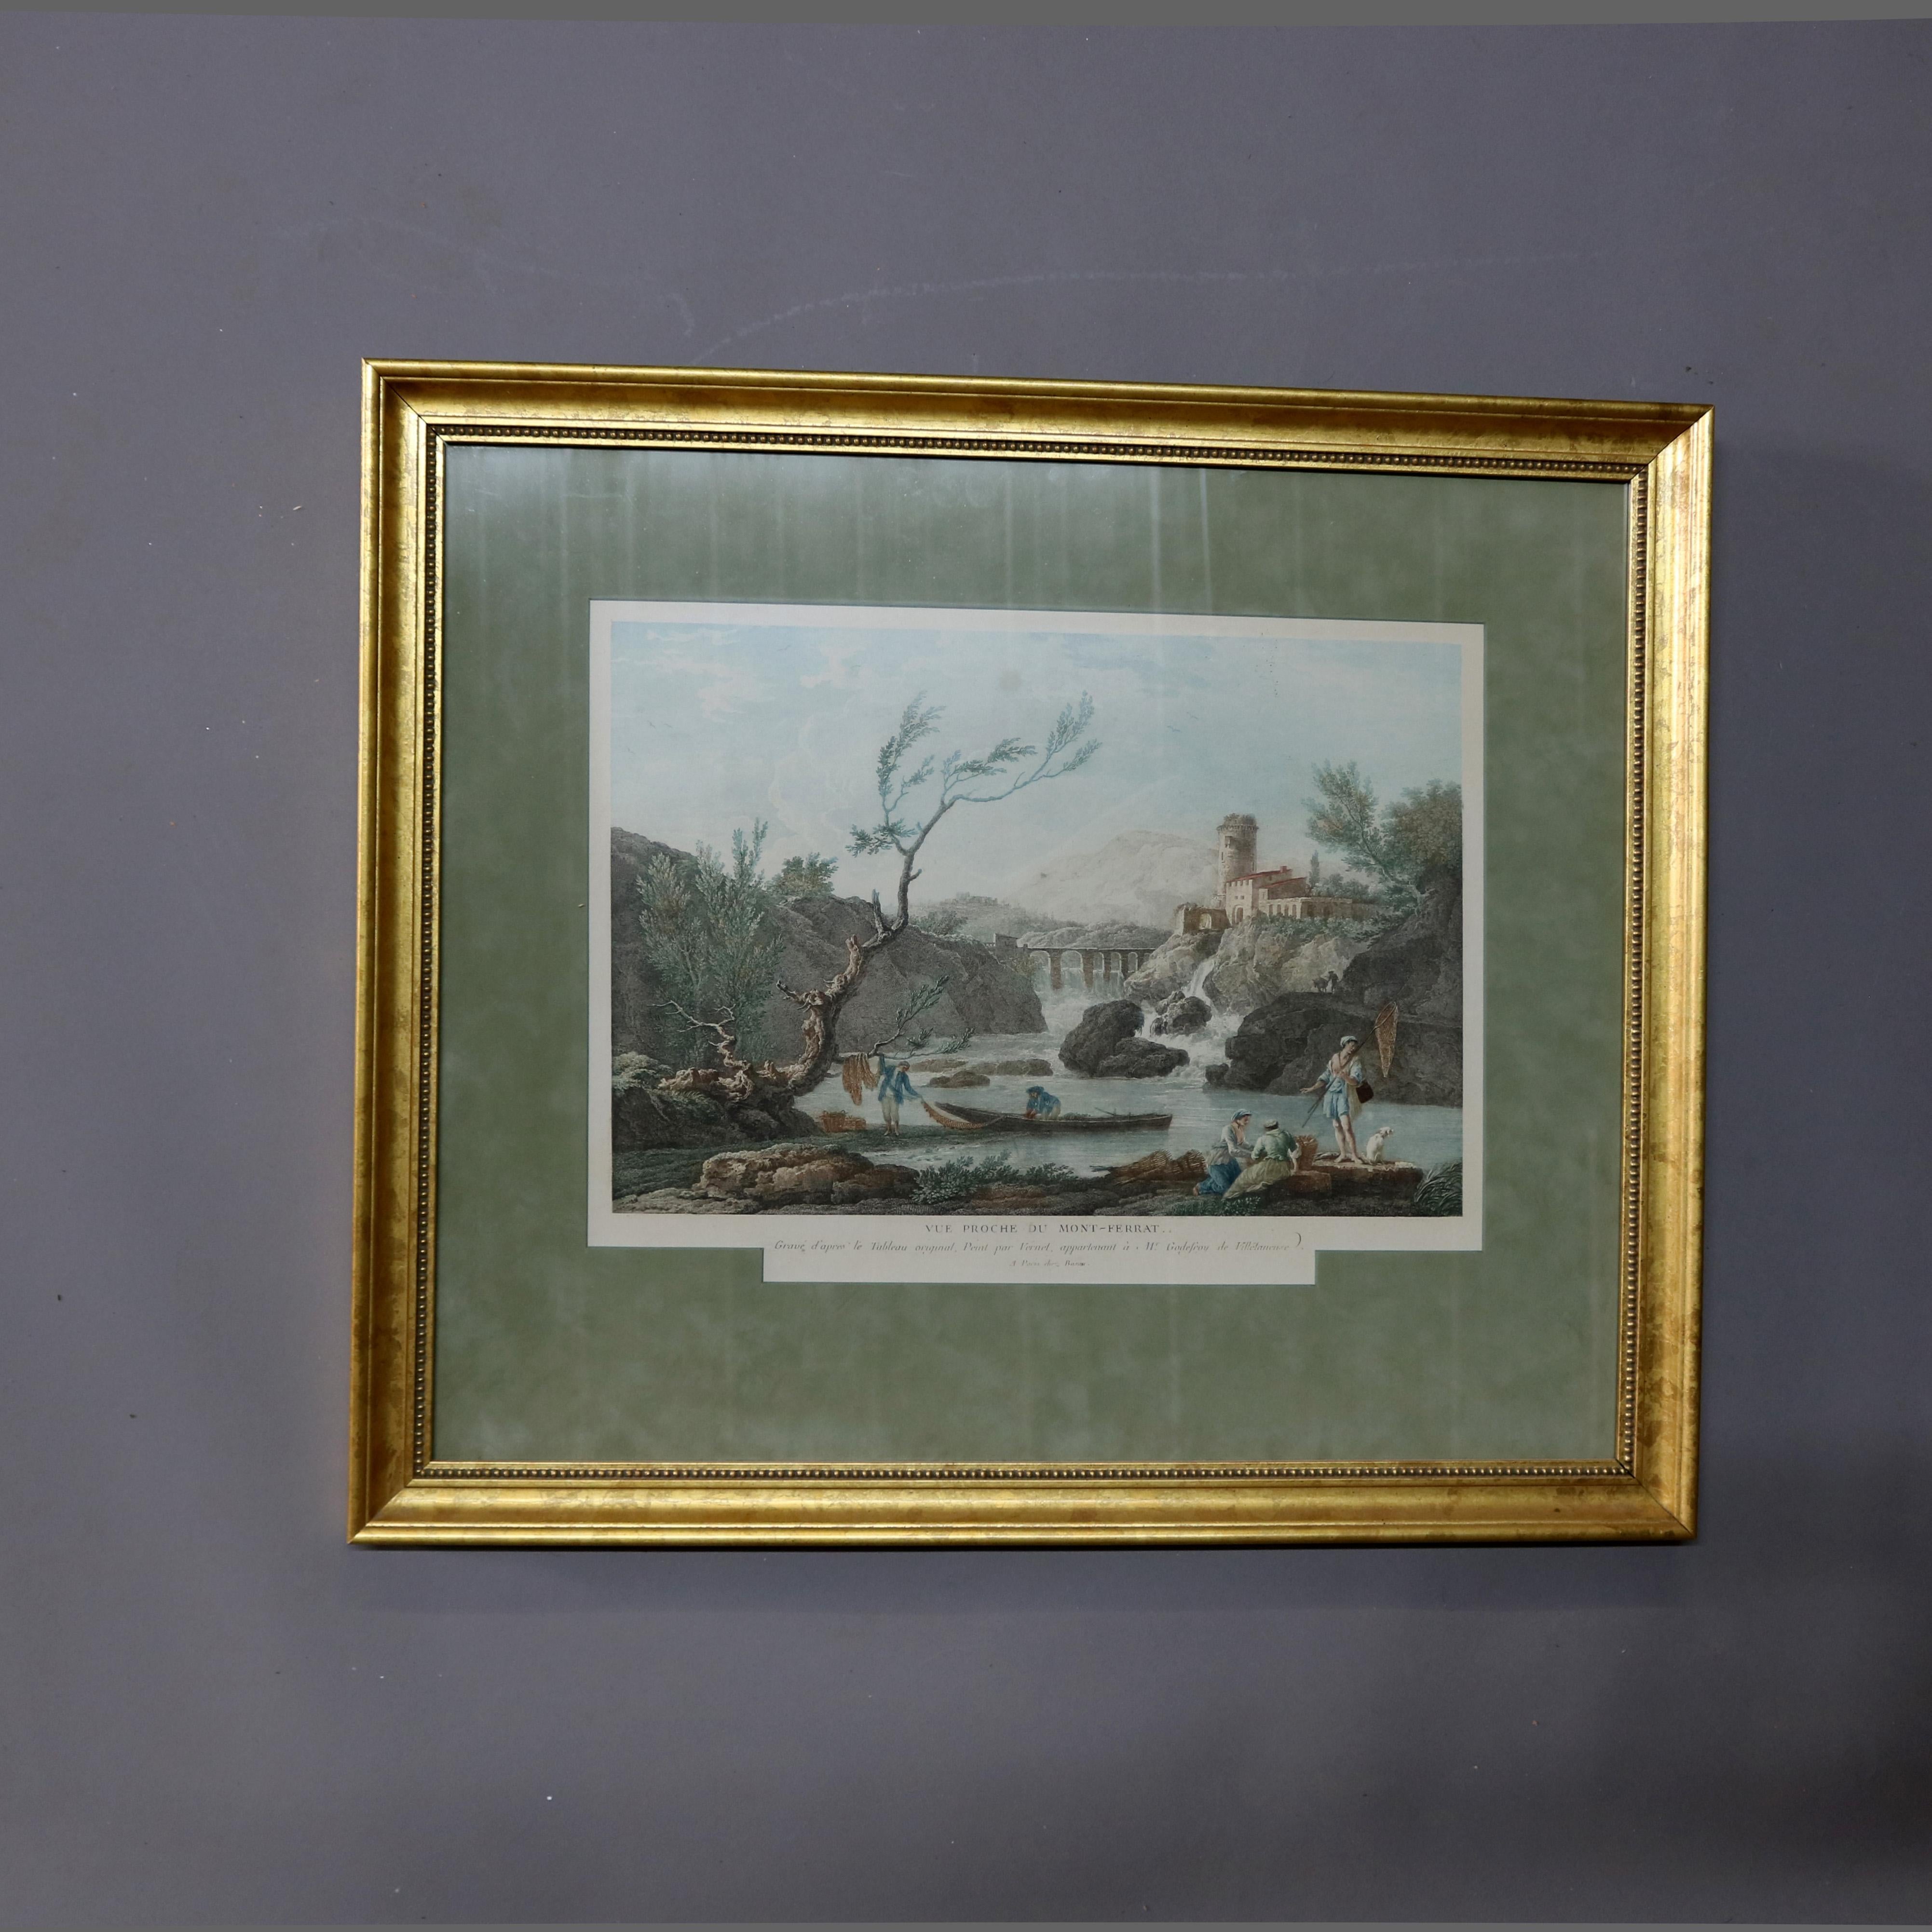 Glass Hand Tinted French Harbor Fishing Scene Engraving after J. Vernet, circa 1870